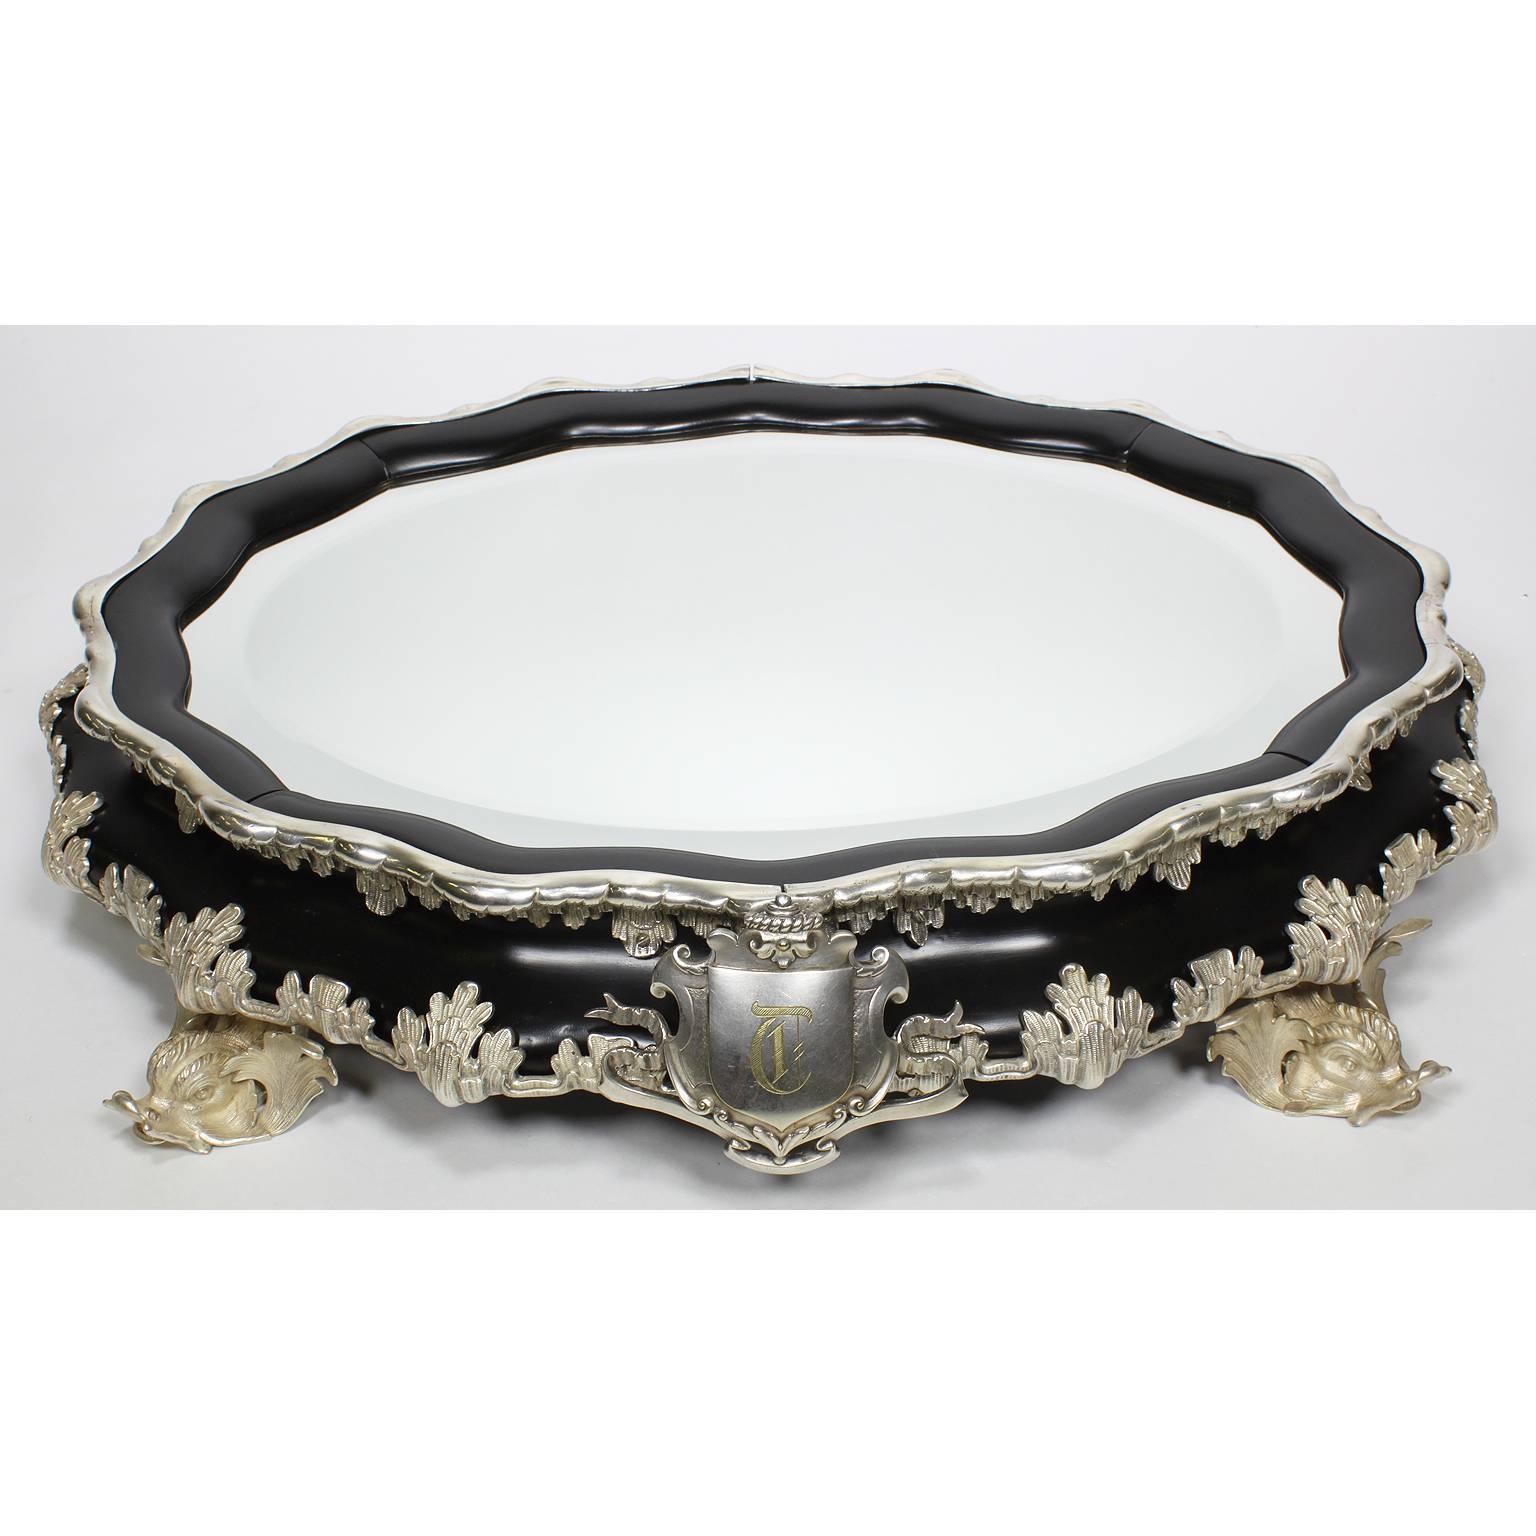 A very fine French 19th-20th century neoclassical revival style ebonized wood and figural silver plated mounted plateau Surtout de Table centerpiece in the manner of Buccellati. The ovoid shaped body surmounted with silvered bronze mount figures of